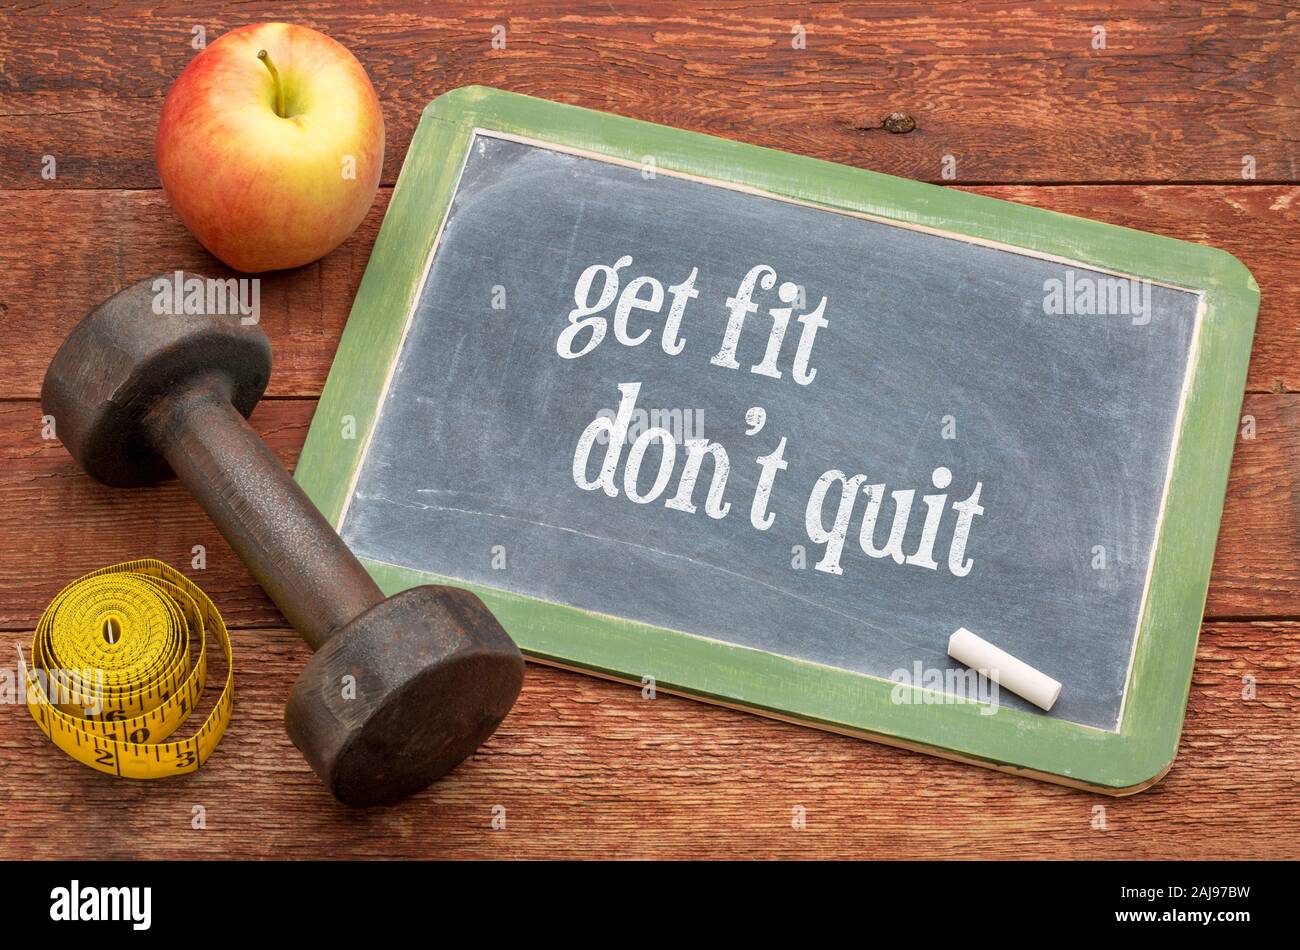 Get fit, do not quit. -  slate blackboard sign against weathered red painted barn wood with a dumbbell, apple and tape measure, Fitness and determinat Stock Photo